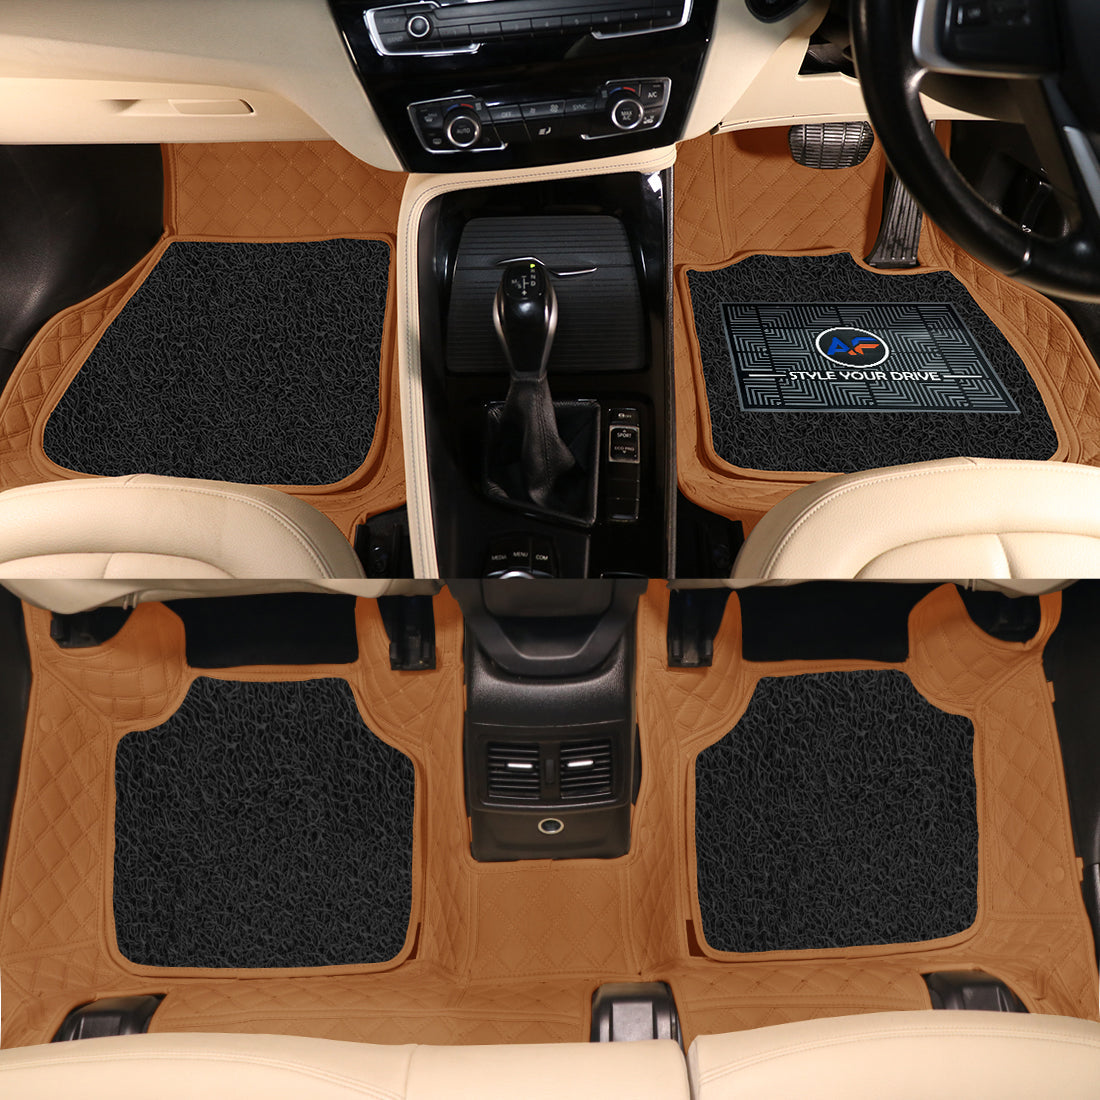 Land Rover Range Rover Vogue SE 2021 7D Luxury Car Mat, All Weather Proof, Anti-Skid, 100% Waterproof & Odorless with Unique Diamond Fish Design (24mm Luxury PU Leather, 2 Rows)